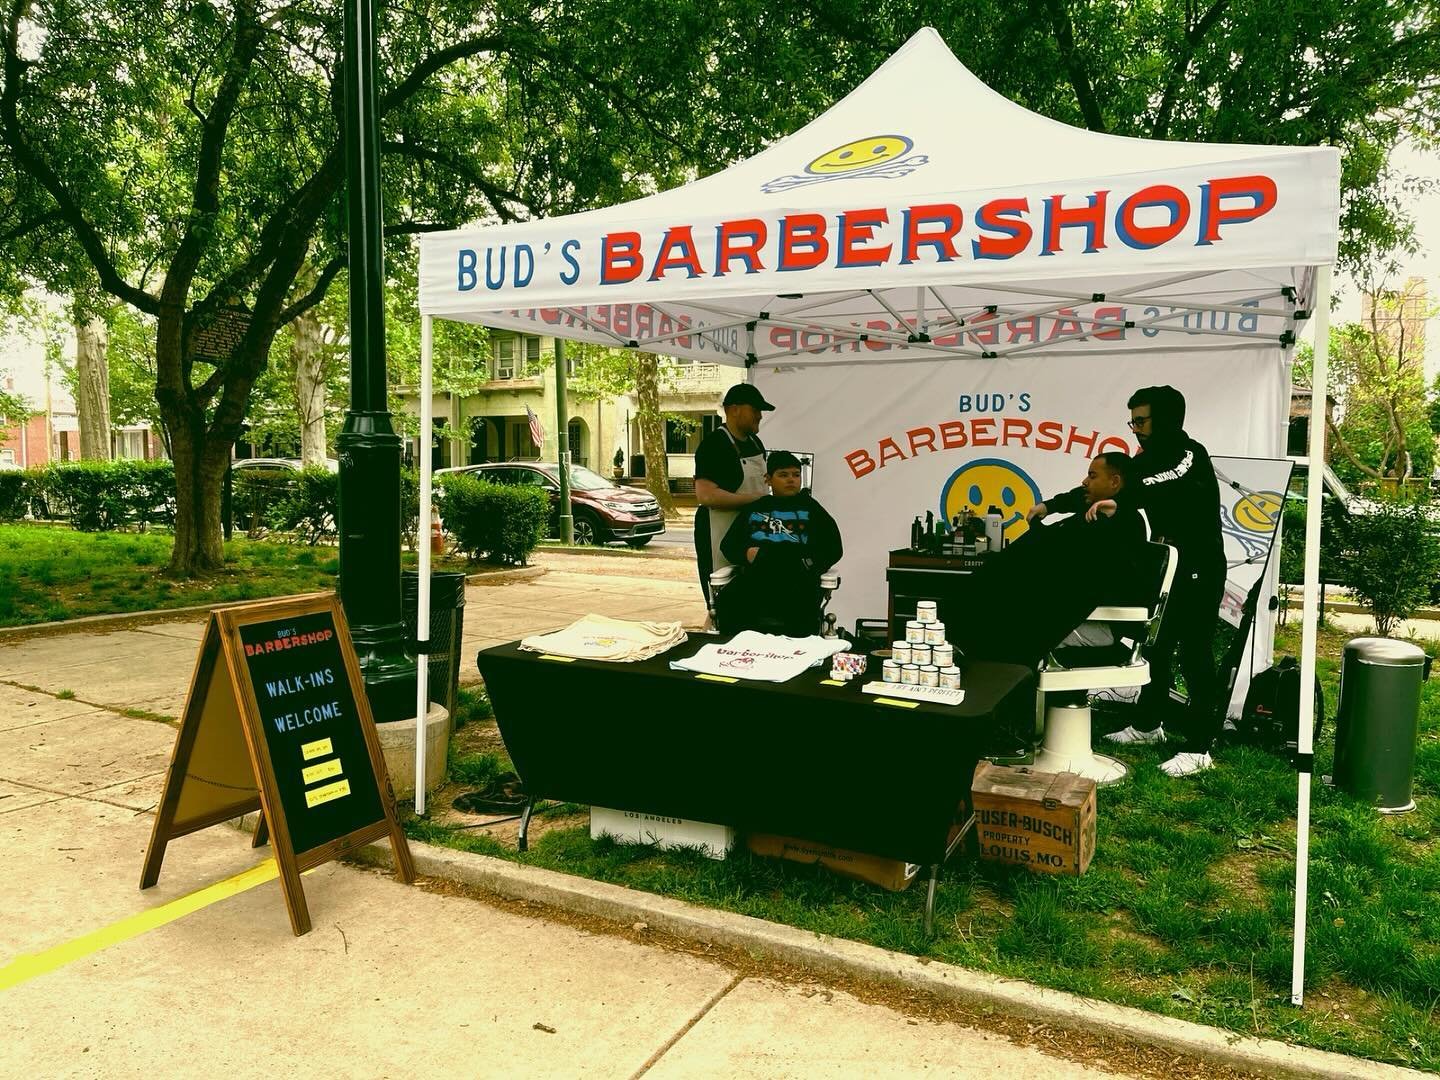 ALL SET UP IN GIRARD PARK AT @genasouthphilly &lsquo;s community picnic! Giving full cut services and a special promo - $15 shape ups (sharpen the edges and taper the neckline)!!! We&rsquo;re here til 3. Come check out the rest of the vendors!🤙🏼

#